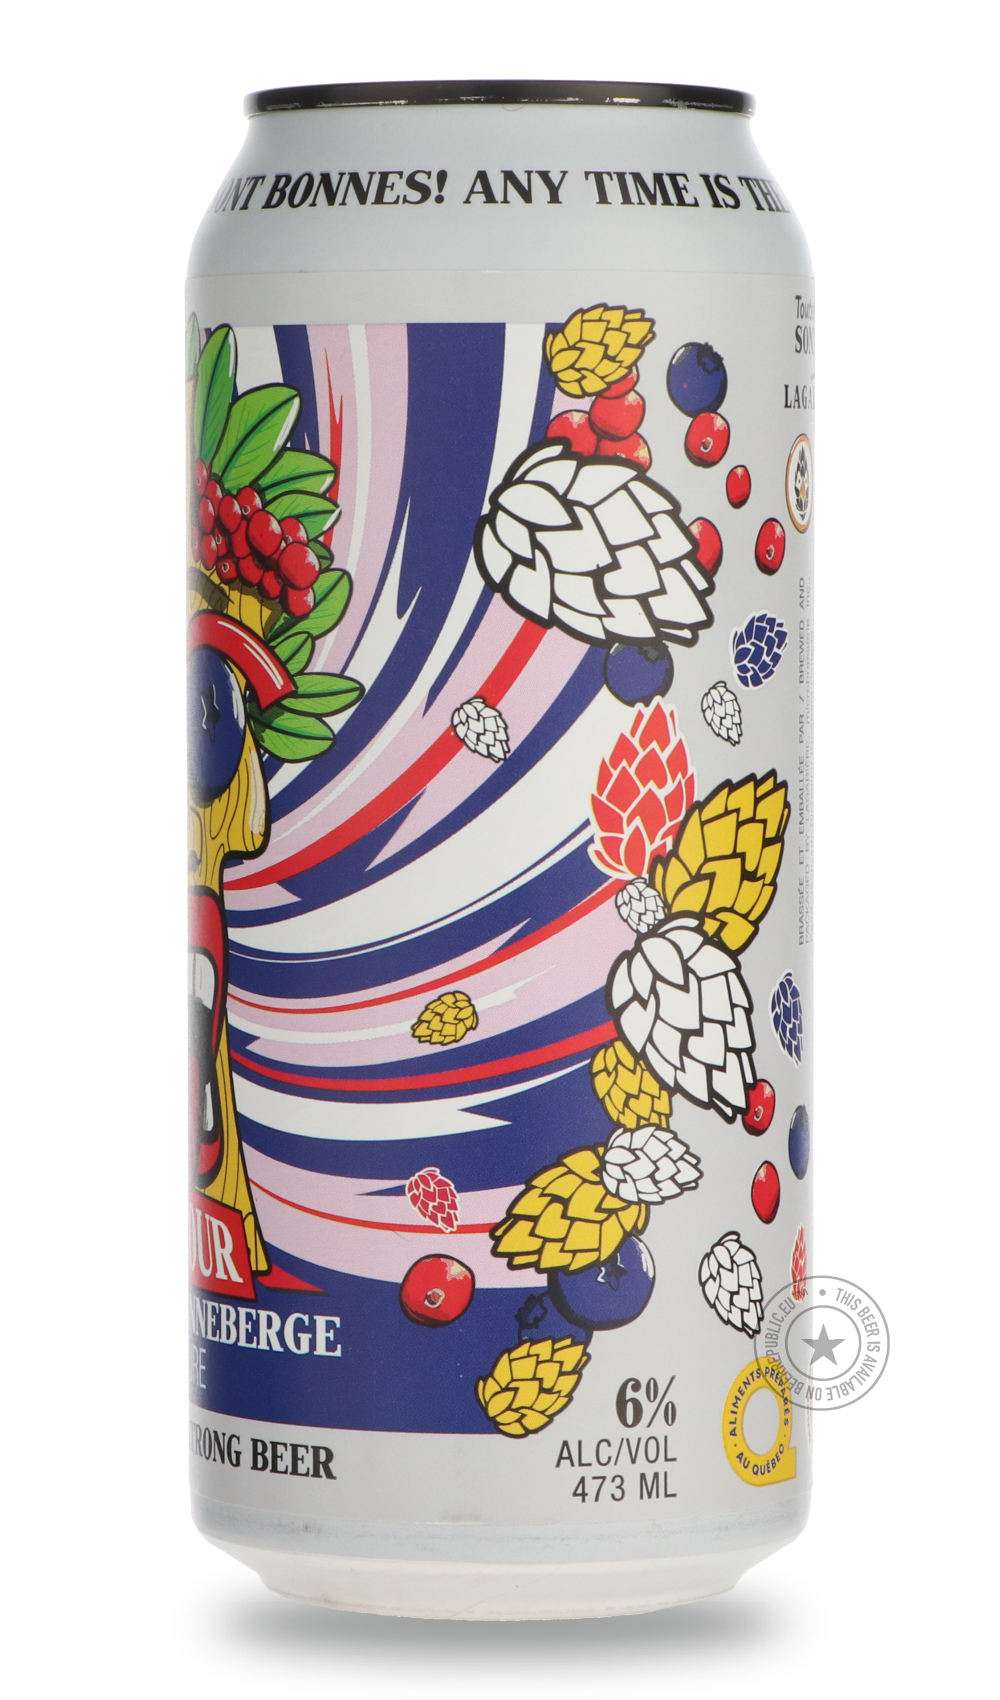 -Lagabière- Tiki Sour Bleuet Et Canneberge-Sour / Wild & Fruity- Only @ Beer Republic - The best online beer store for American & Canadian craft beer - Buy beer online from the USA and Canada - Bier online kopen - Amerikaans bier kopen - Craft beer store - Craft beer kopen - Amerikanisch bier kaufen - Bier online kaufen - Acheter biere online - IPA - Stout - Porter - New England IPA - Hazy IPA - Imperial Stout - Barrel Aged - Barrel Aged Imperial Stout - Brown - Dark beer - Blond - Blonde - Pilsner - Lager 